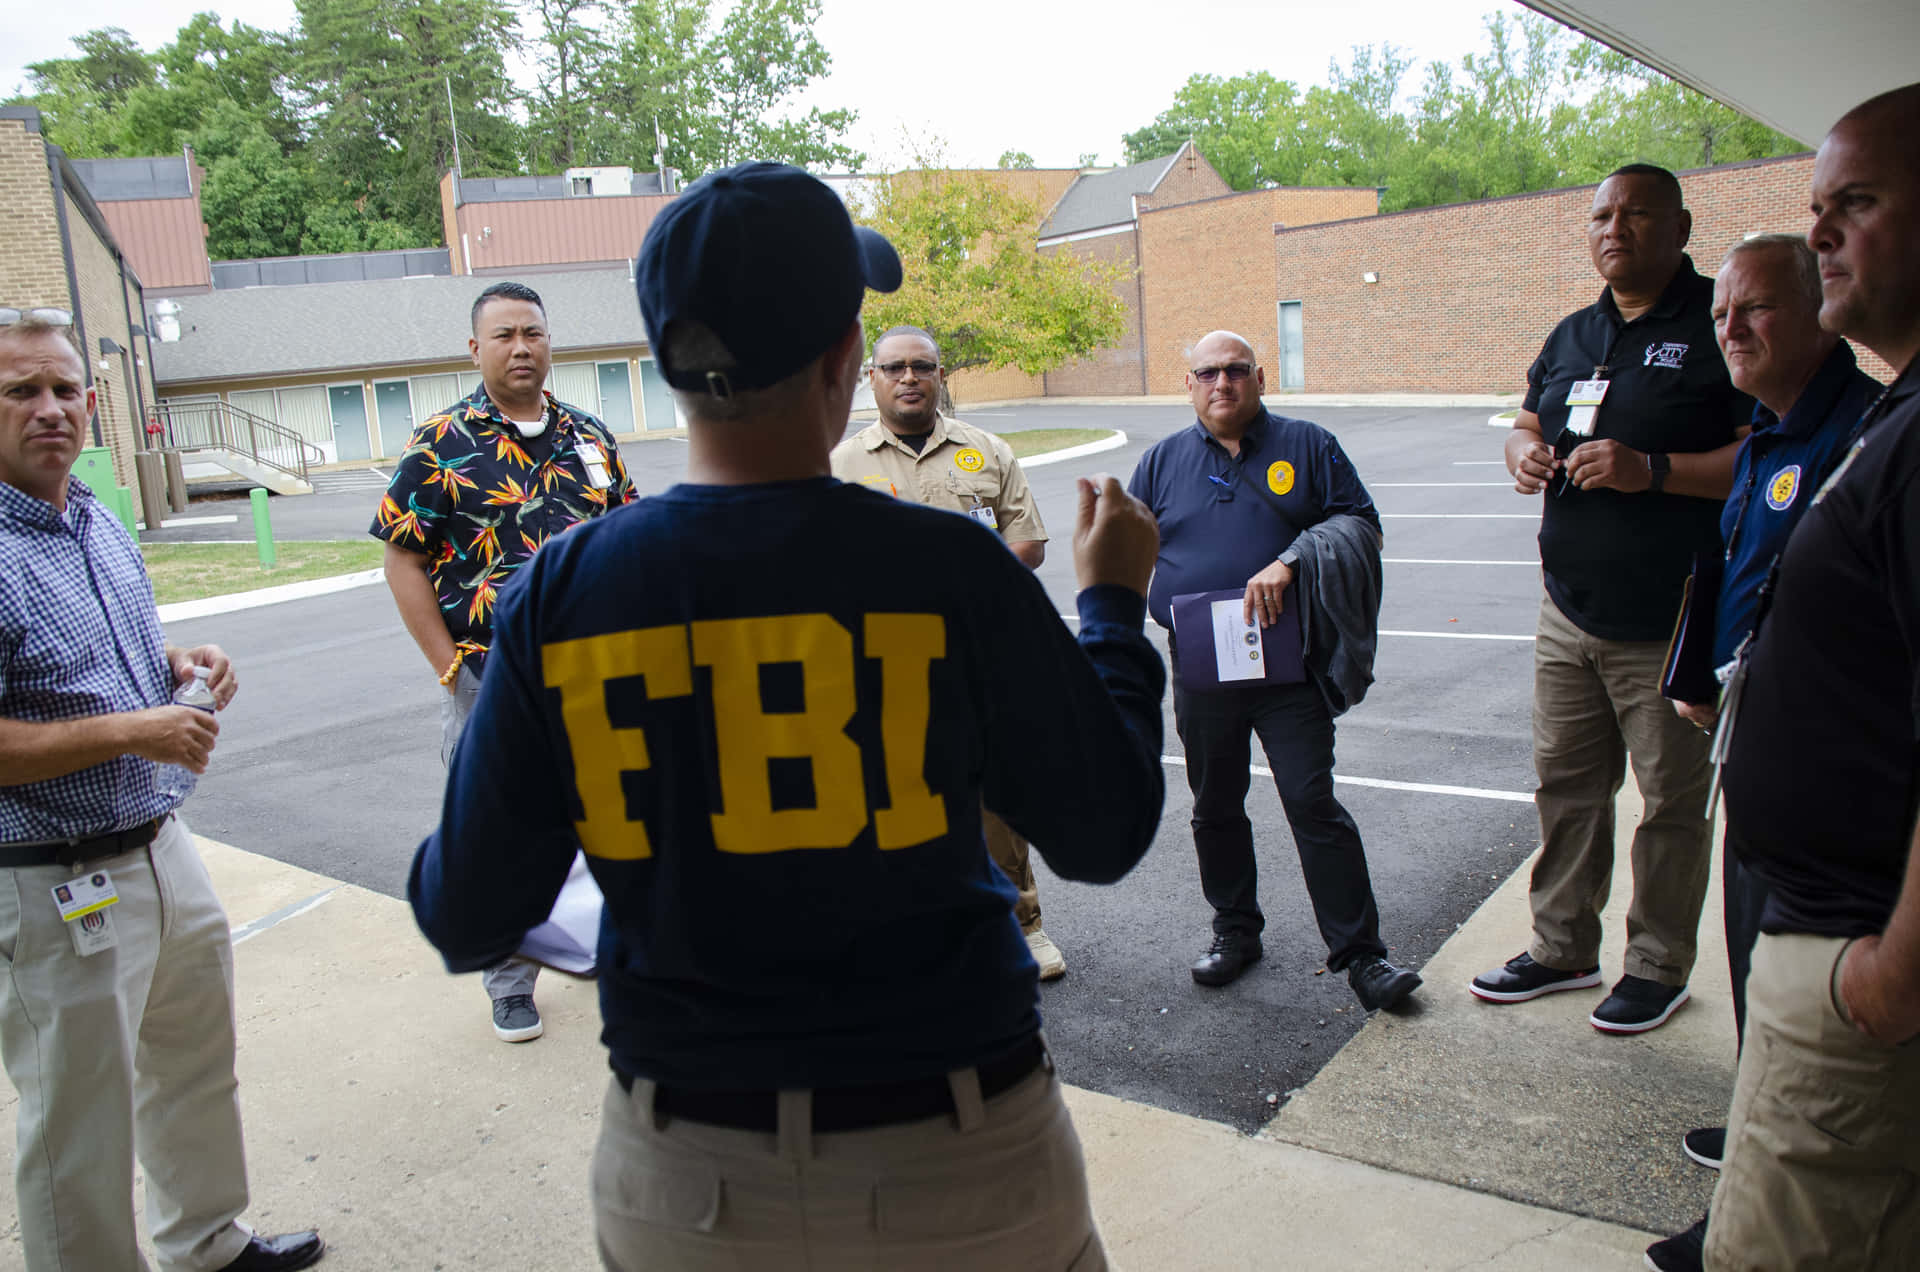 The Fbi Seal In The Forefront